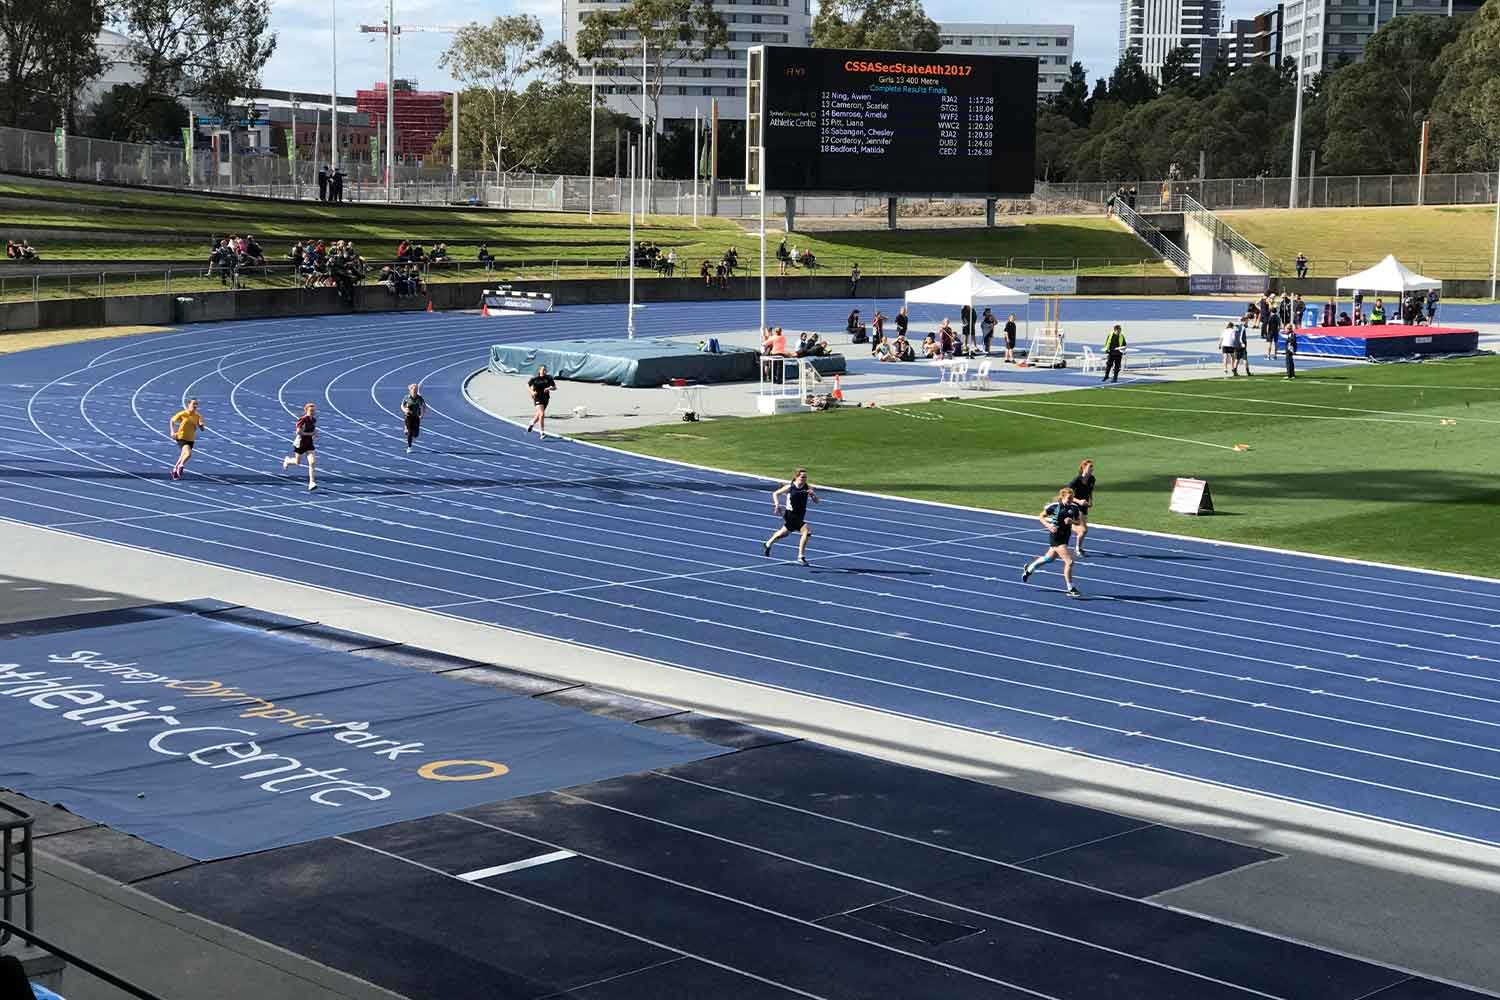 Aerial view of people running on blue outdoor athletic tracks with white line markings